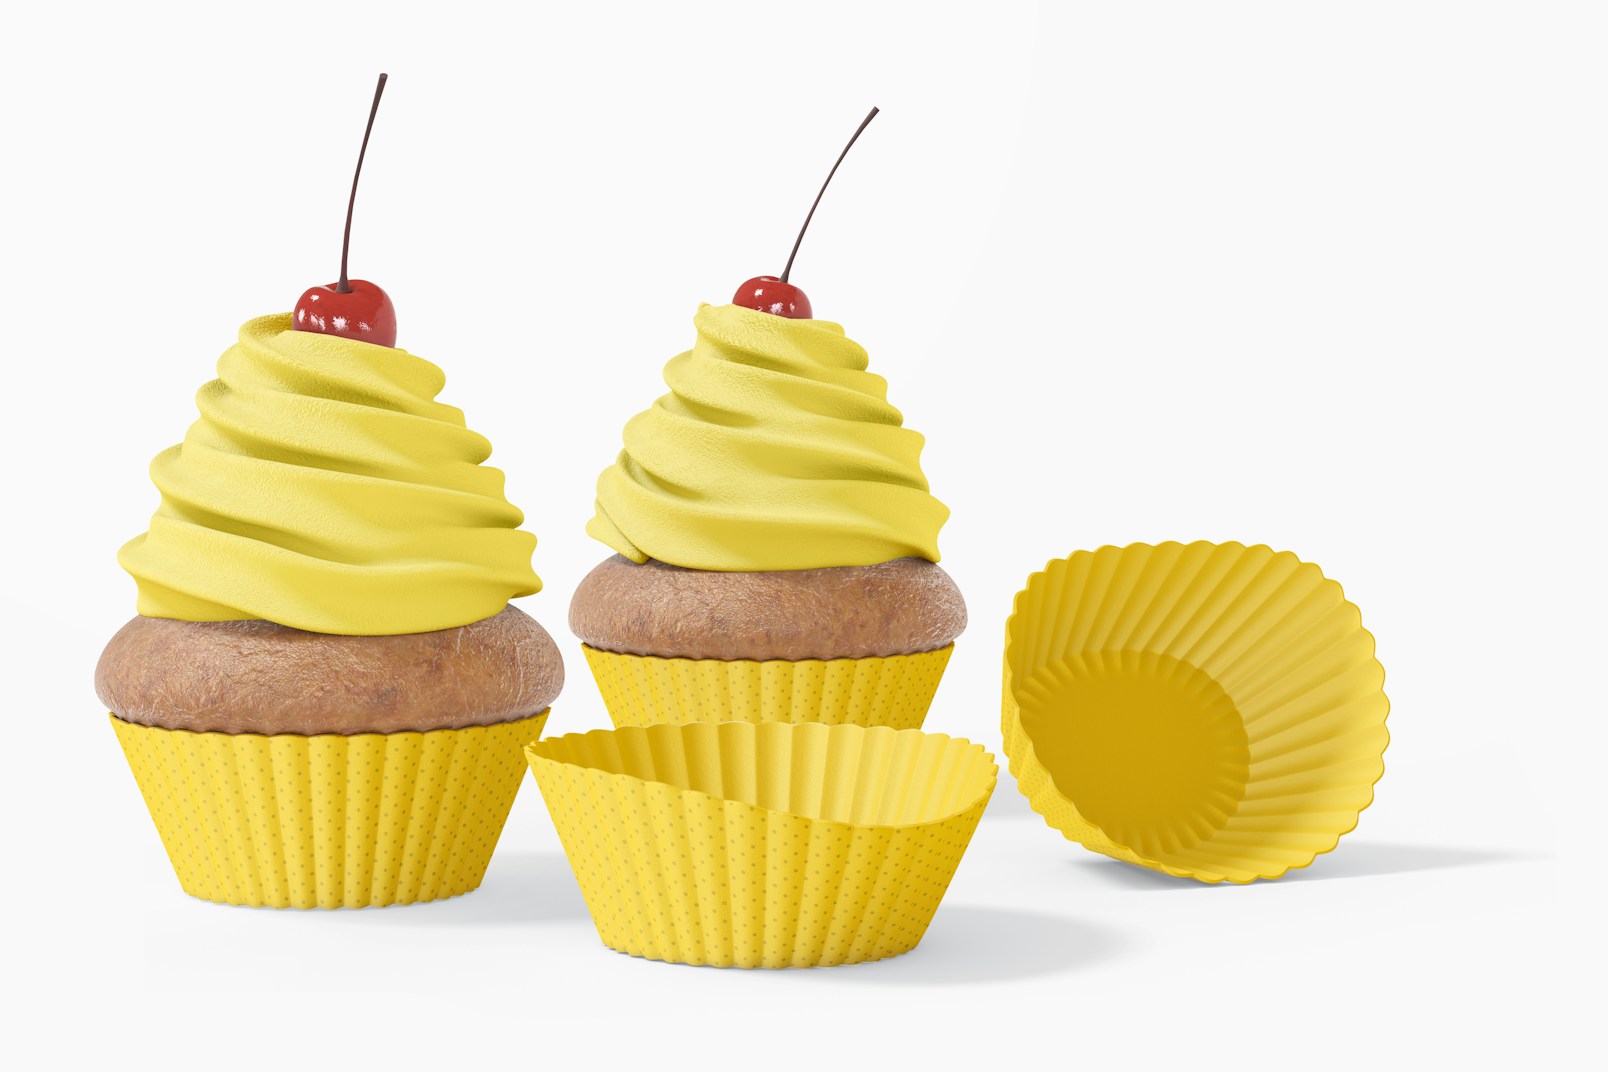 Cupcakes with Silicone Baking Cup Mockup